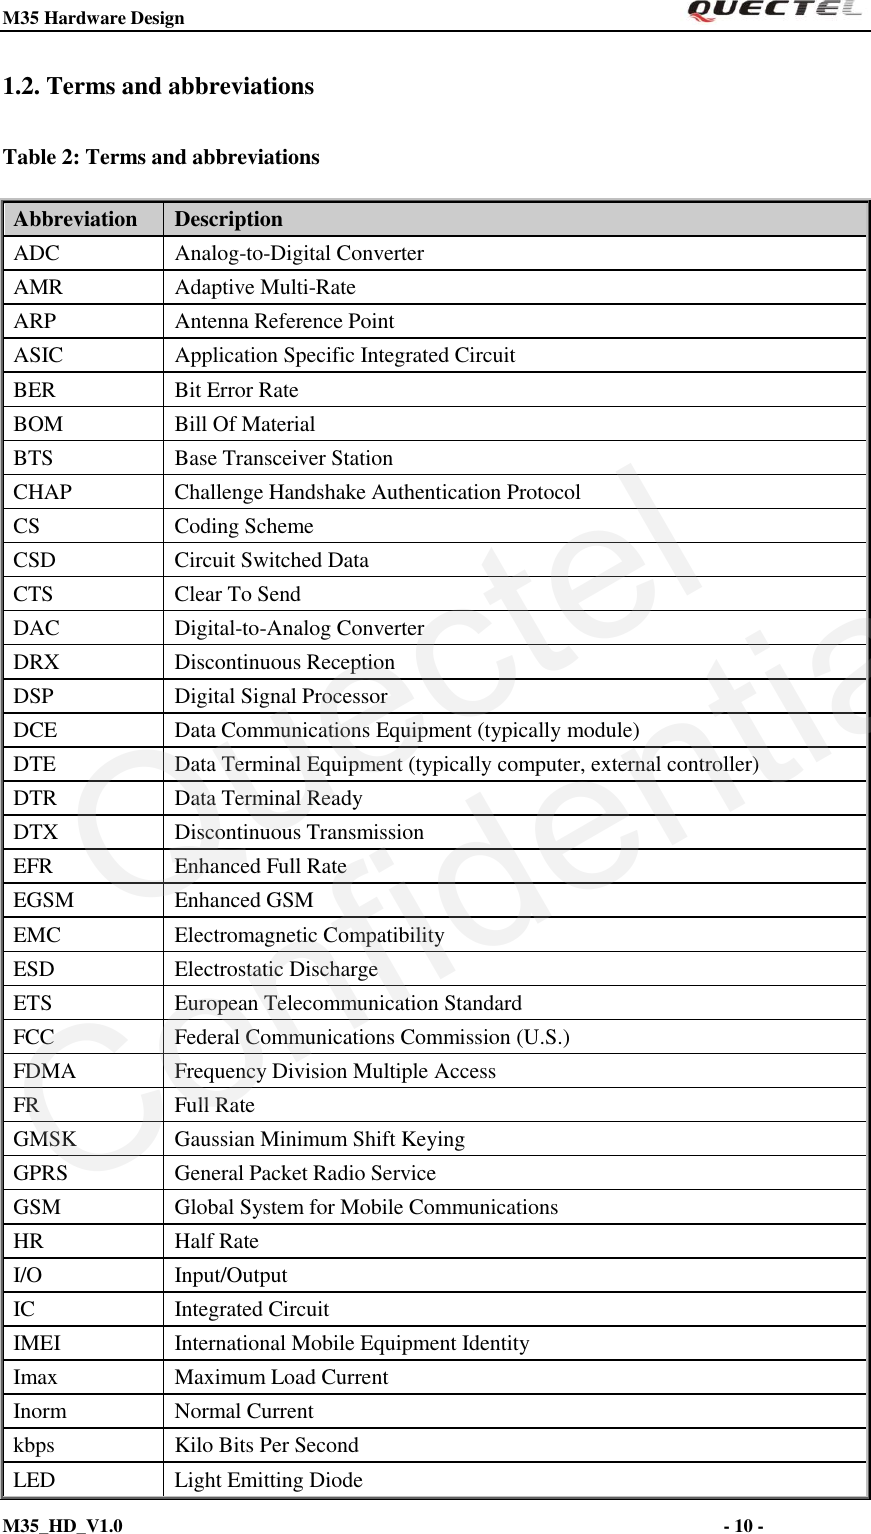 M35 Hardware Design                                                                  M35_HD_V1.0                                                                                                                         - 10 -    1.2. Terms and abbreviations Table 2: Terms and abbreviations Abbreviation   Description ADC   Analog-to-Digital Converter AMR Adaptive Multi-Rate ARP   Antenna Reference Point ASIC   Application Specific Integrated Circuit BER   Bit Error Rate BOM Bill Of Material BTS   Base Transceiver Station CHAP   Challenge Handshake Authentication Protocol CS   Coding Scheme CSD   Circuit Switched Data CTS   Clear To Send DAC   Digital-to-Analog Converter DRX   Discontinuous Reception DSP   Digital Signal Processor DCE Data Communications Equipment (typically module) DTE   Data Terminal Equipment (typically computer, external controller) DTR   Data Terminal Ready DTX   Discontinuous Transmission EFR   Enhanced Full Rate EGSM   Enhanced GSM EMC   Electromagnetic Compatibility ESD   Electrostatic Discharge ETS   European Telecommunication Standard FCC   Federal Communications Commission (U.S.) FDMA   Frequency Division Multiple Access FR   Full Rate GMSK Gaussian Minimum Shift Keying GPRS   General Packet Radio Service GSM   Global System for Mobile Communications HR   Half Rate I/O   Input/Output IC   Integrated Circuit IMEI   International Mobile Equipment Identity Imax Maximum Load Current Inorm Normal Current kbps   Kilo Bits Per Second LED   Light Emitting Diode QuectelConfidential